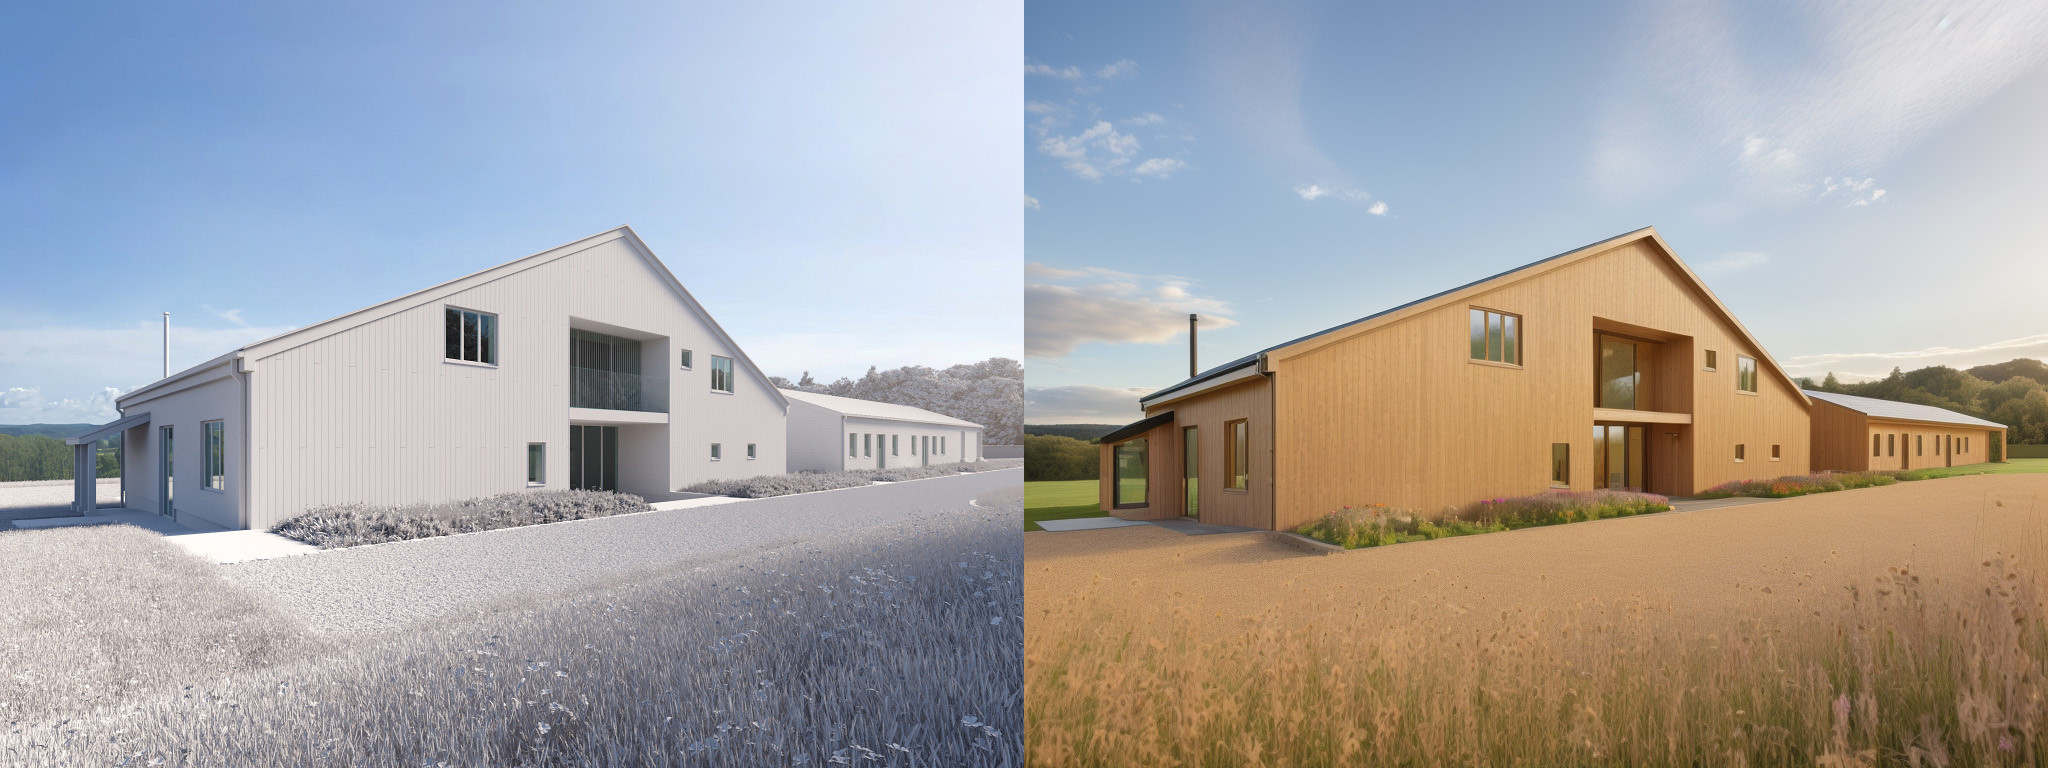 Comparison of a clay render of a modern barn conversion and the AI render